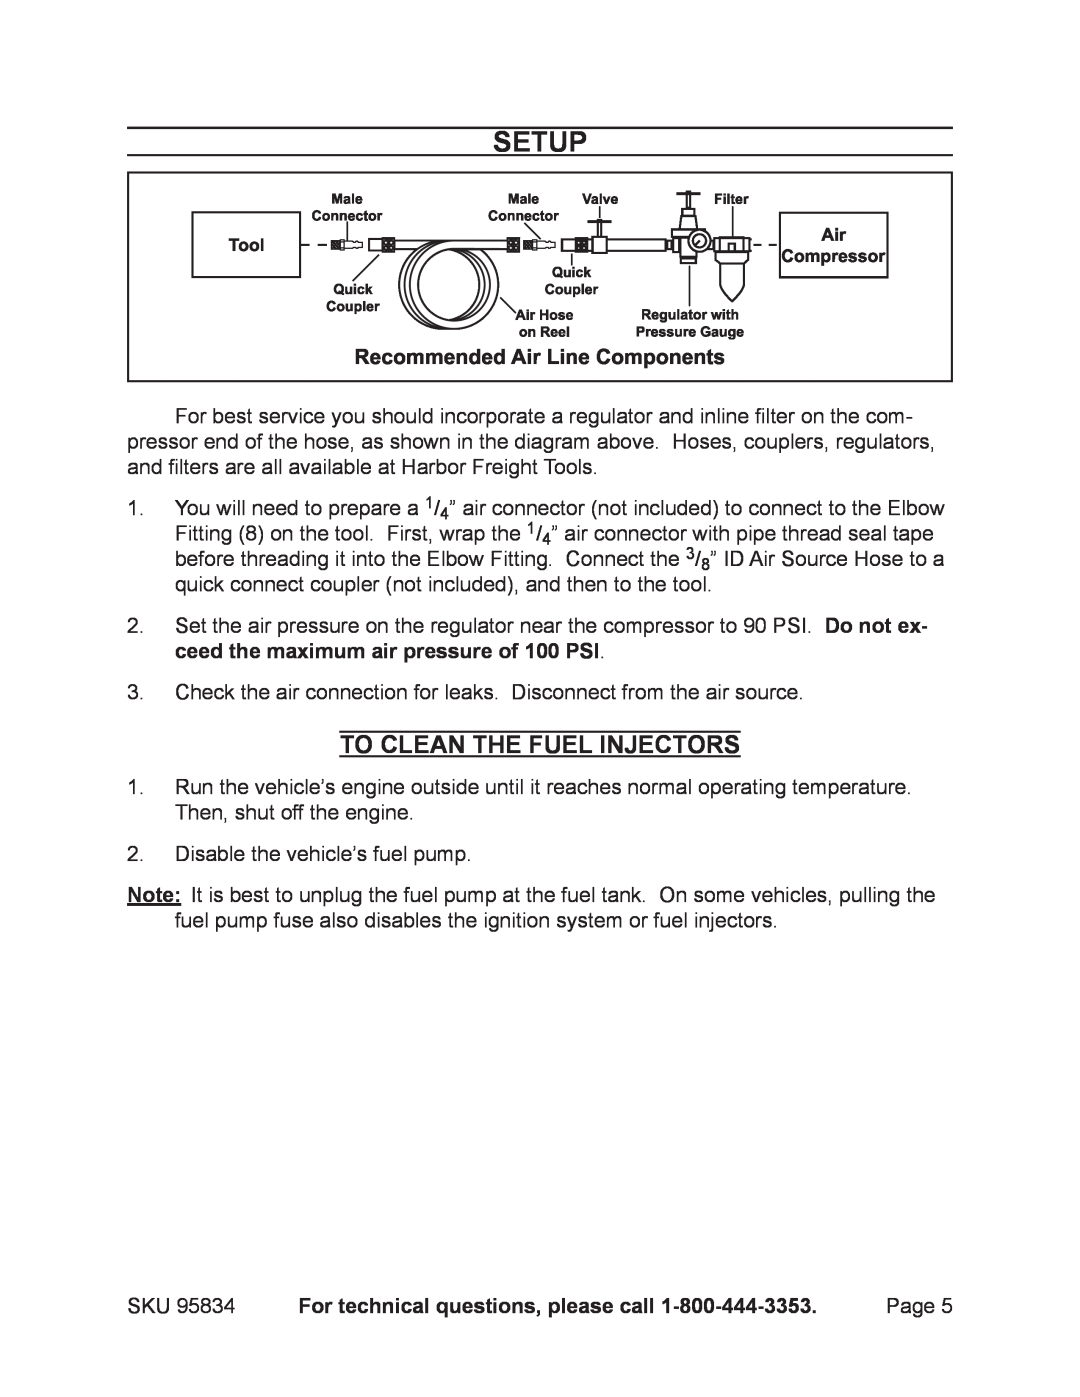 Harbor Freight Tools 95834 operating instructions Setup, To Clean The Fuel Injectors, For technical questions, please call 